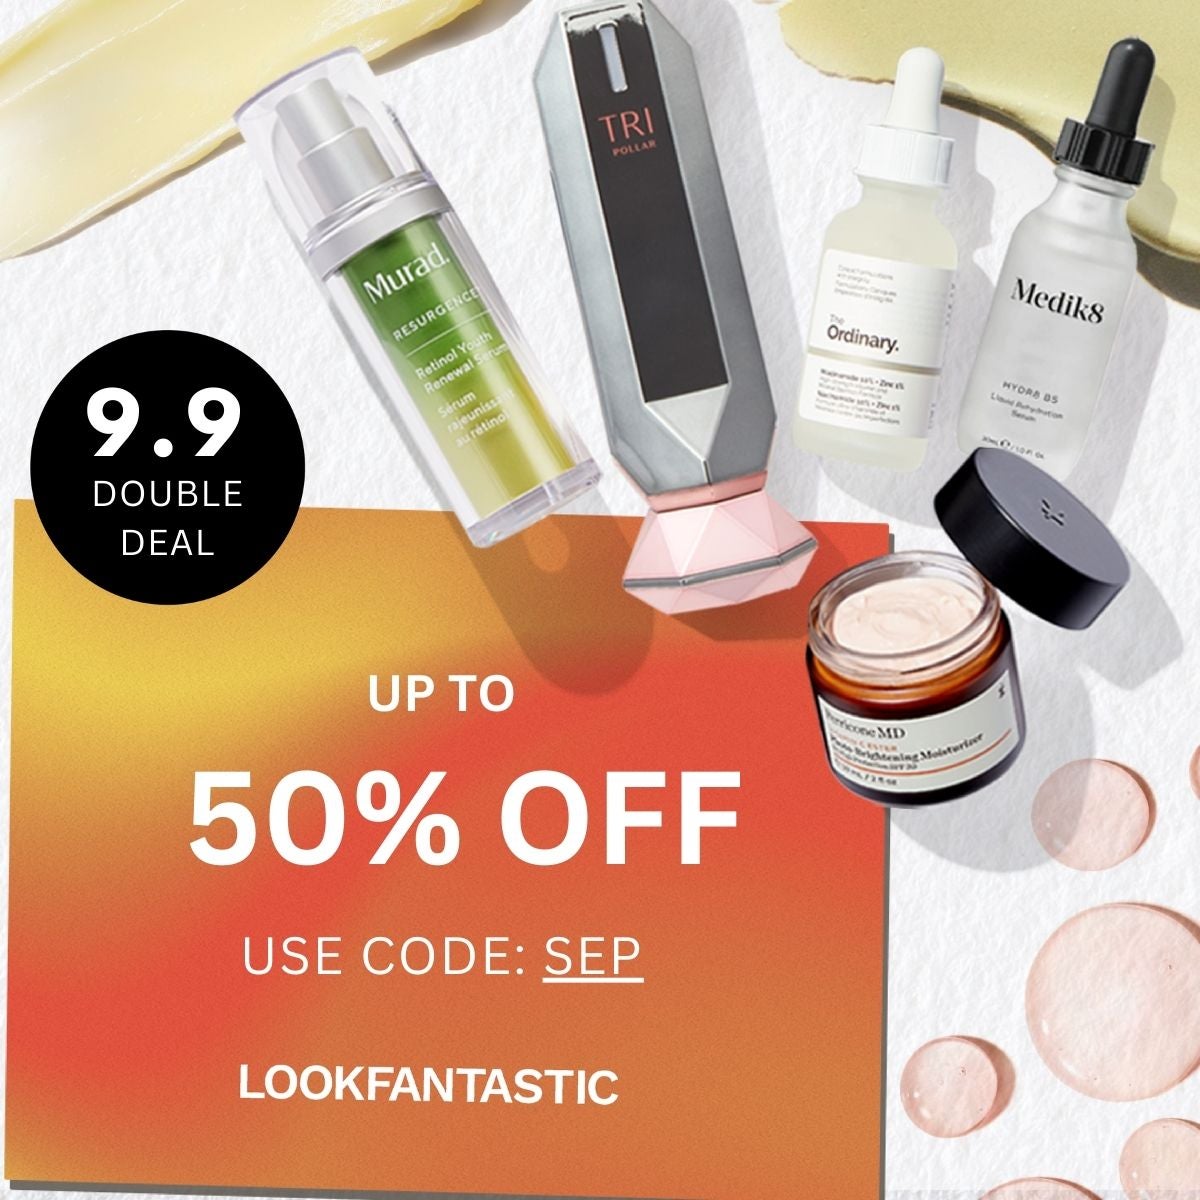 Save up to 50% OFF